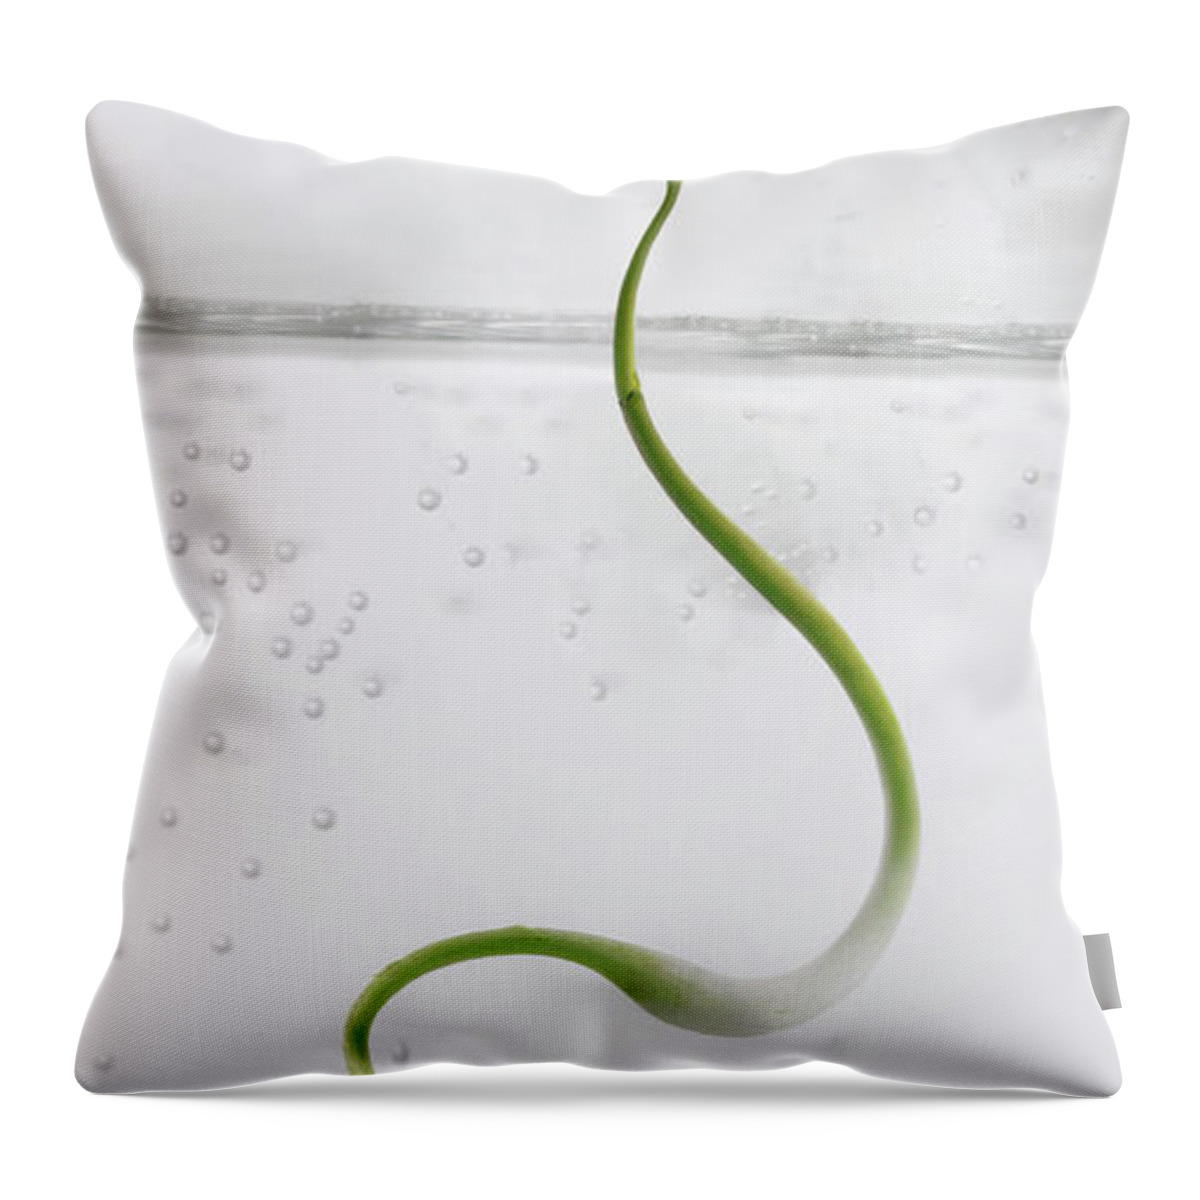 White Background Throw Pillow featuring the photograph Plant Growing In Glass Of Water by Opificio 42